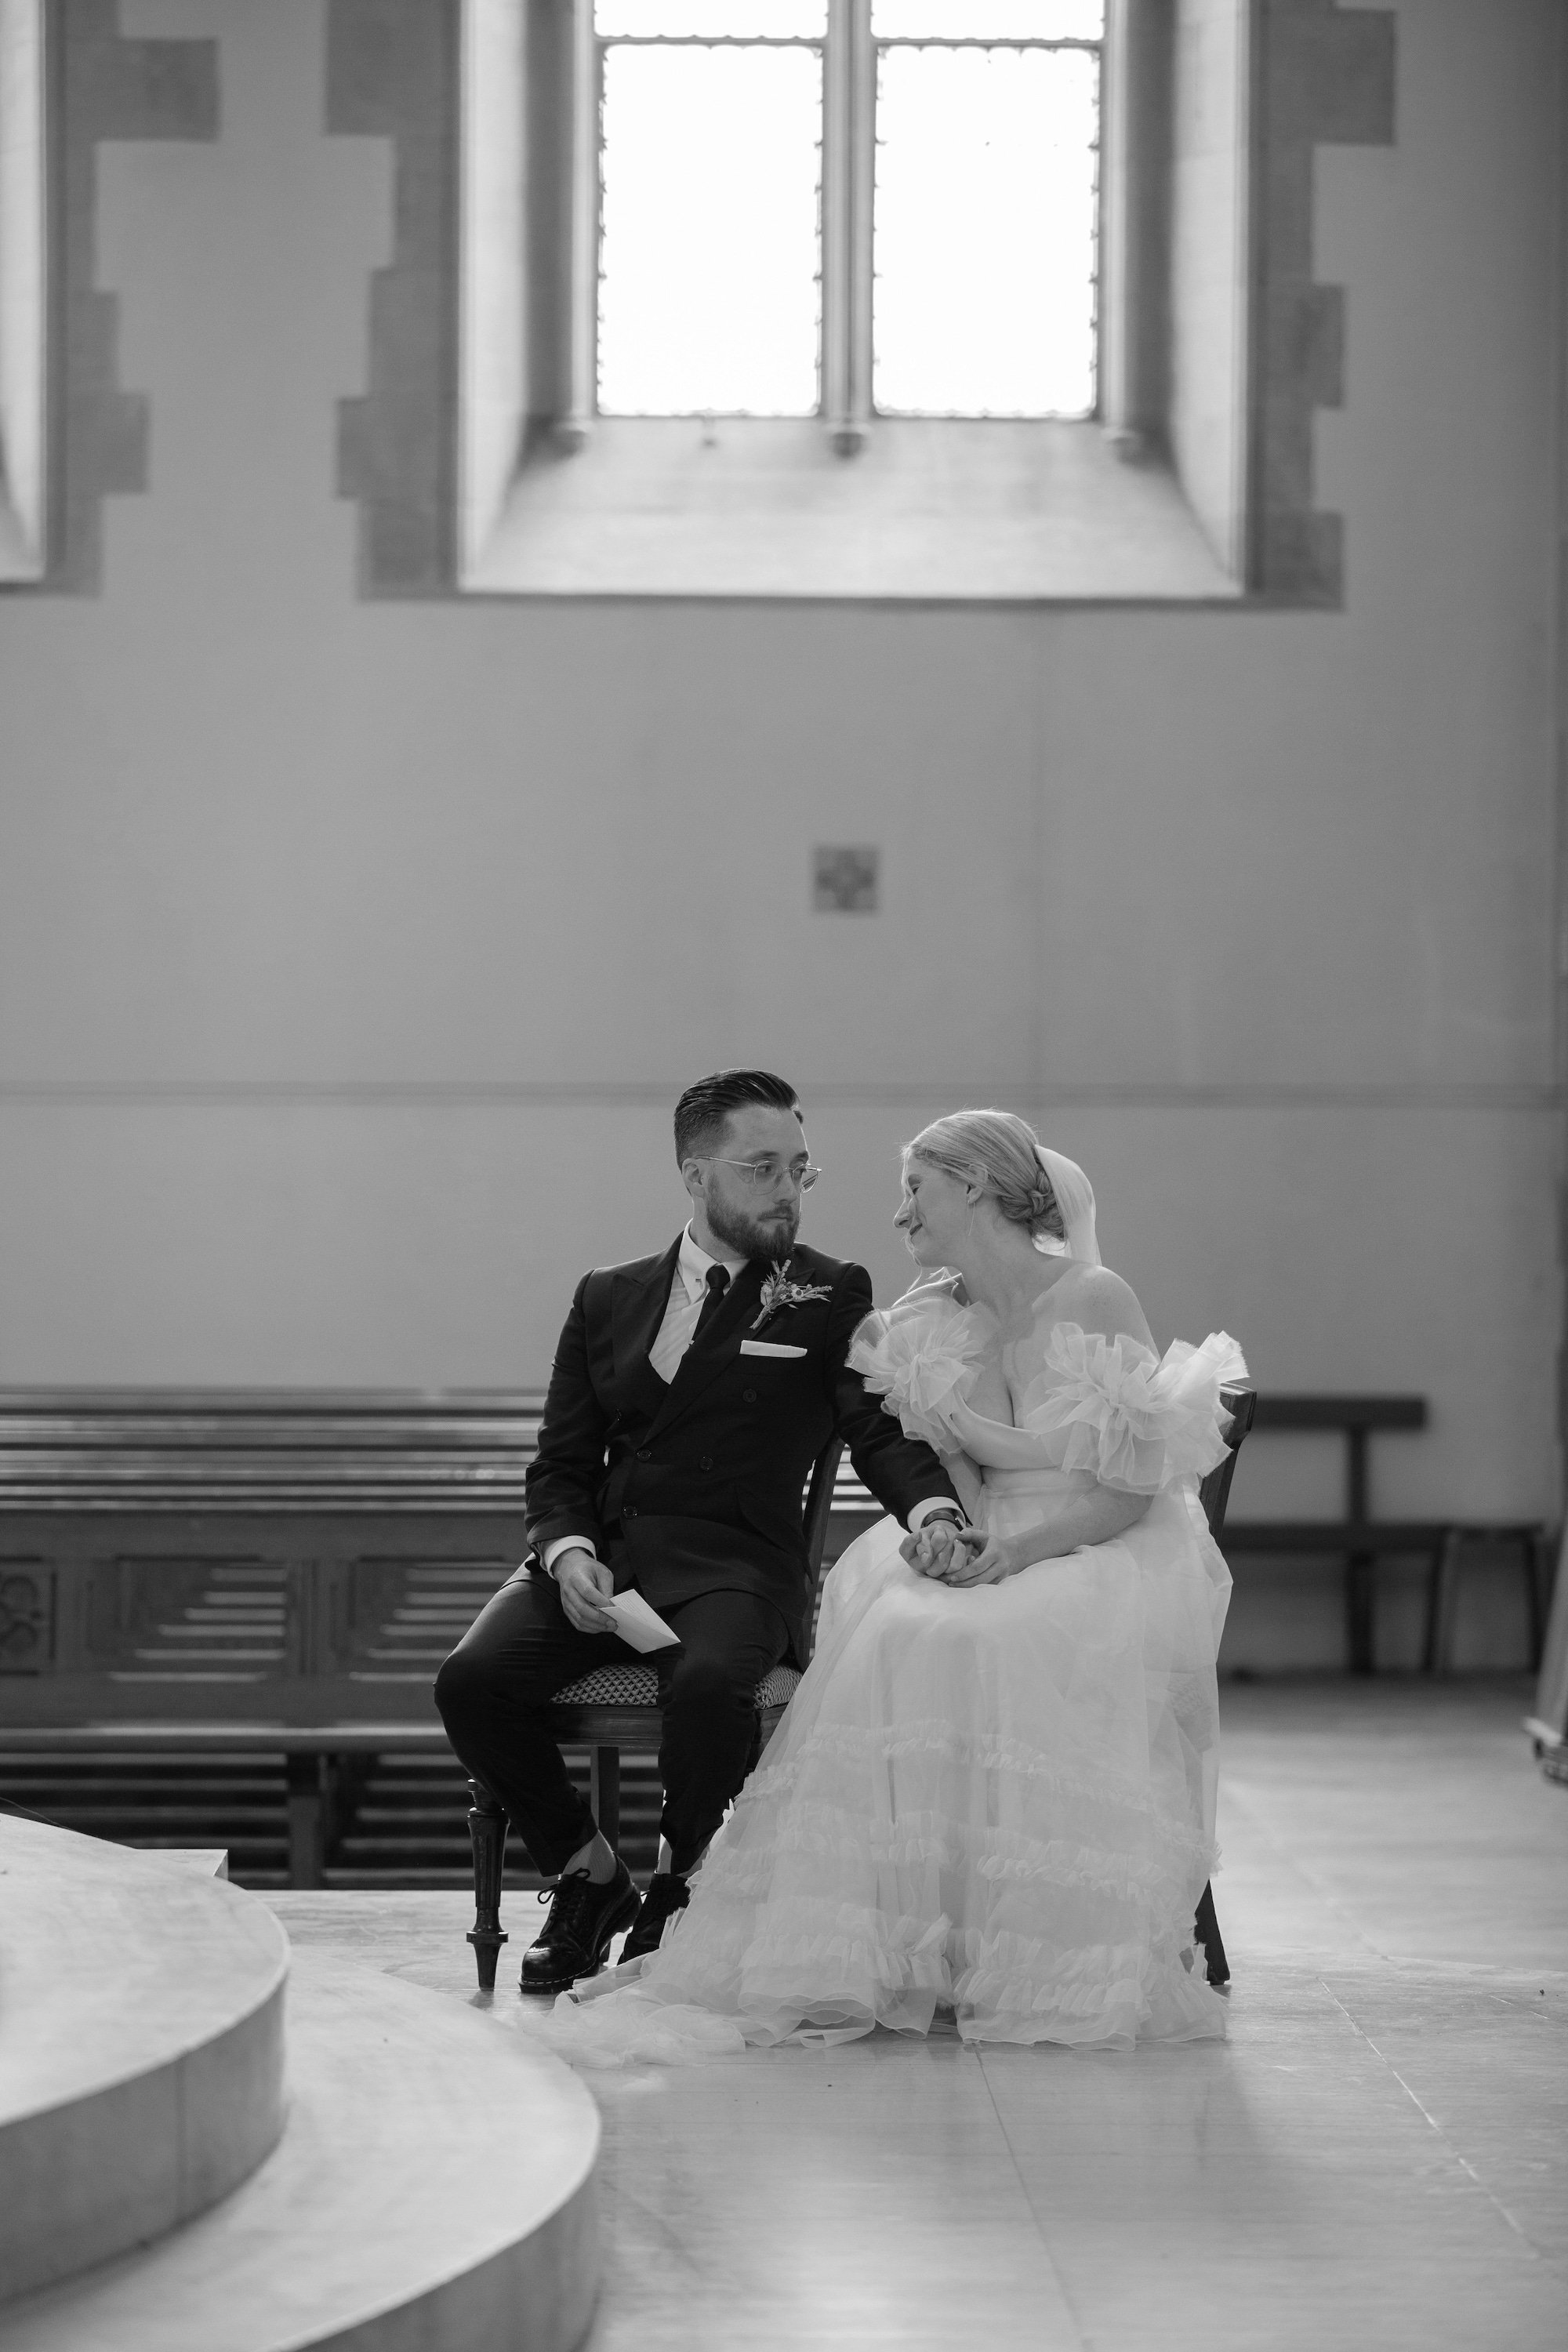 Beautiful bride Holly wore the Mayfair wedding dress by Halfpenny London